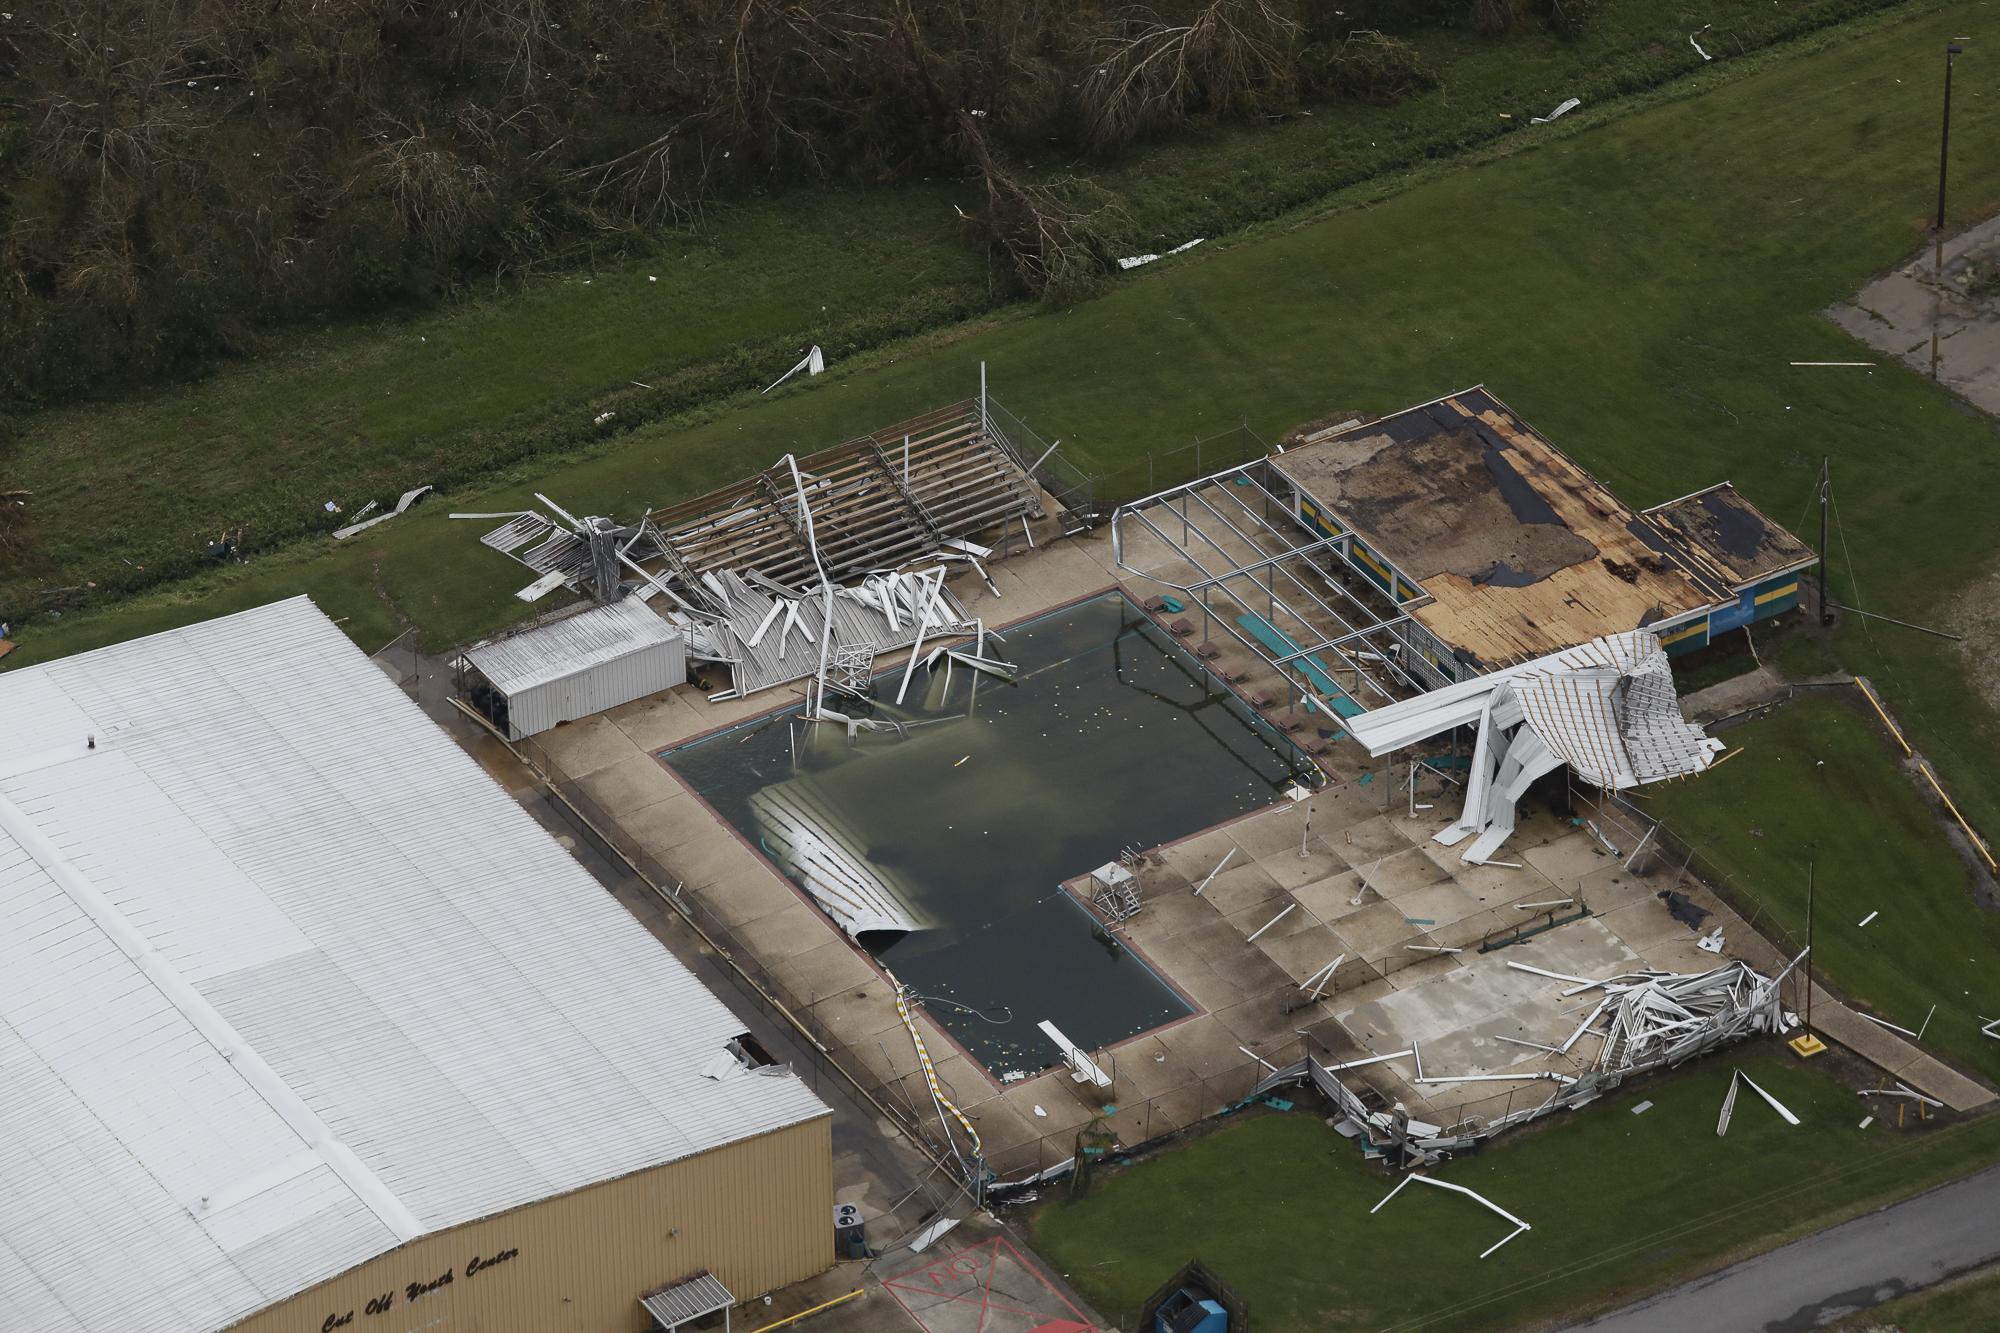 Hurricane Ida in Louisiana - An aerial view shows a damaged pool and a destroyed house...